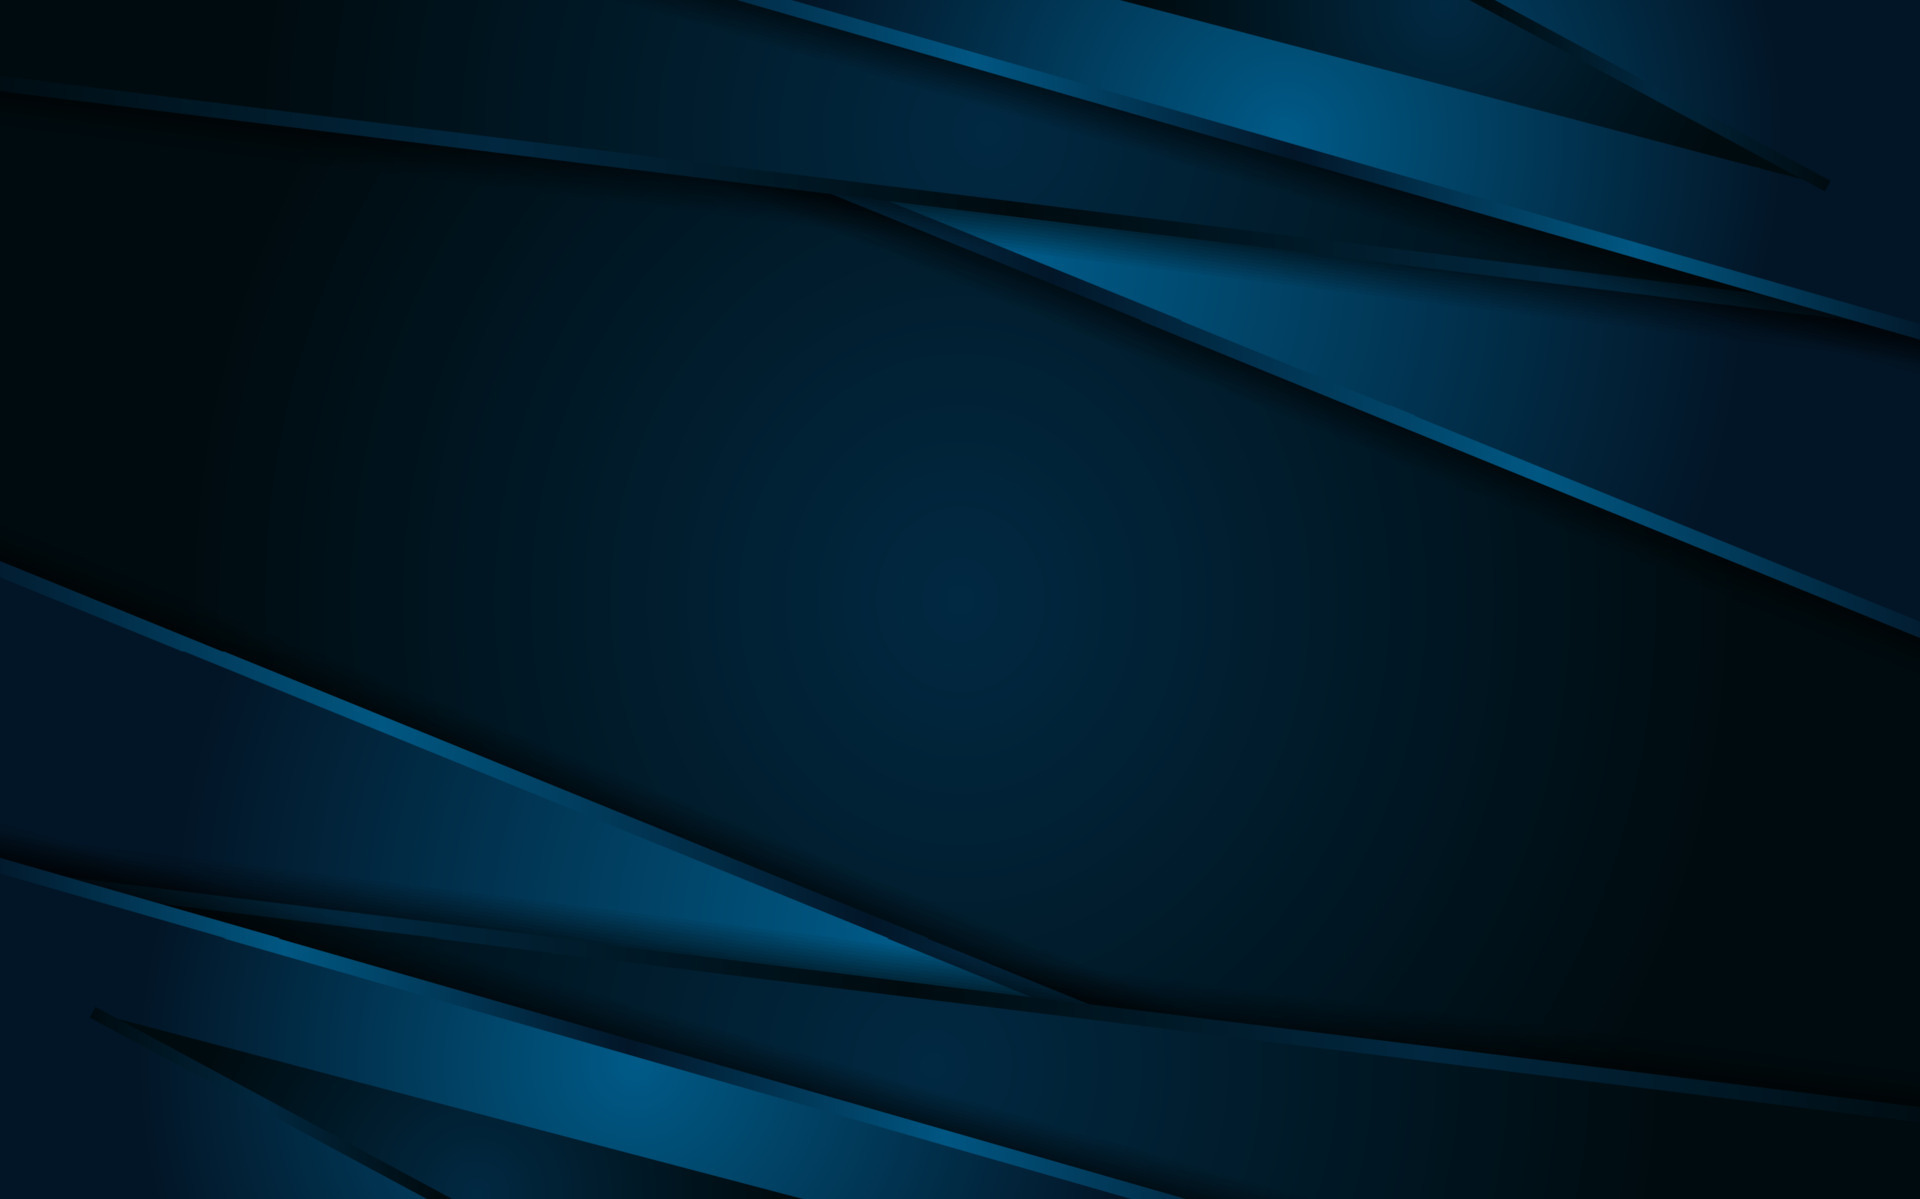 Abstract Dark Blue Lines and Shape Background Design. Usable for ...